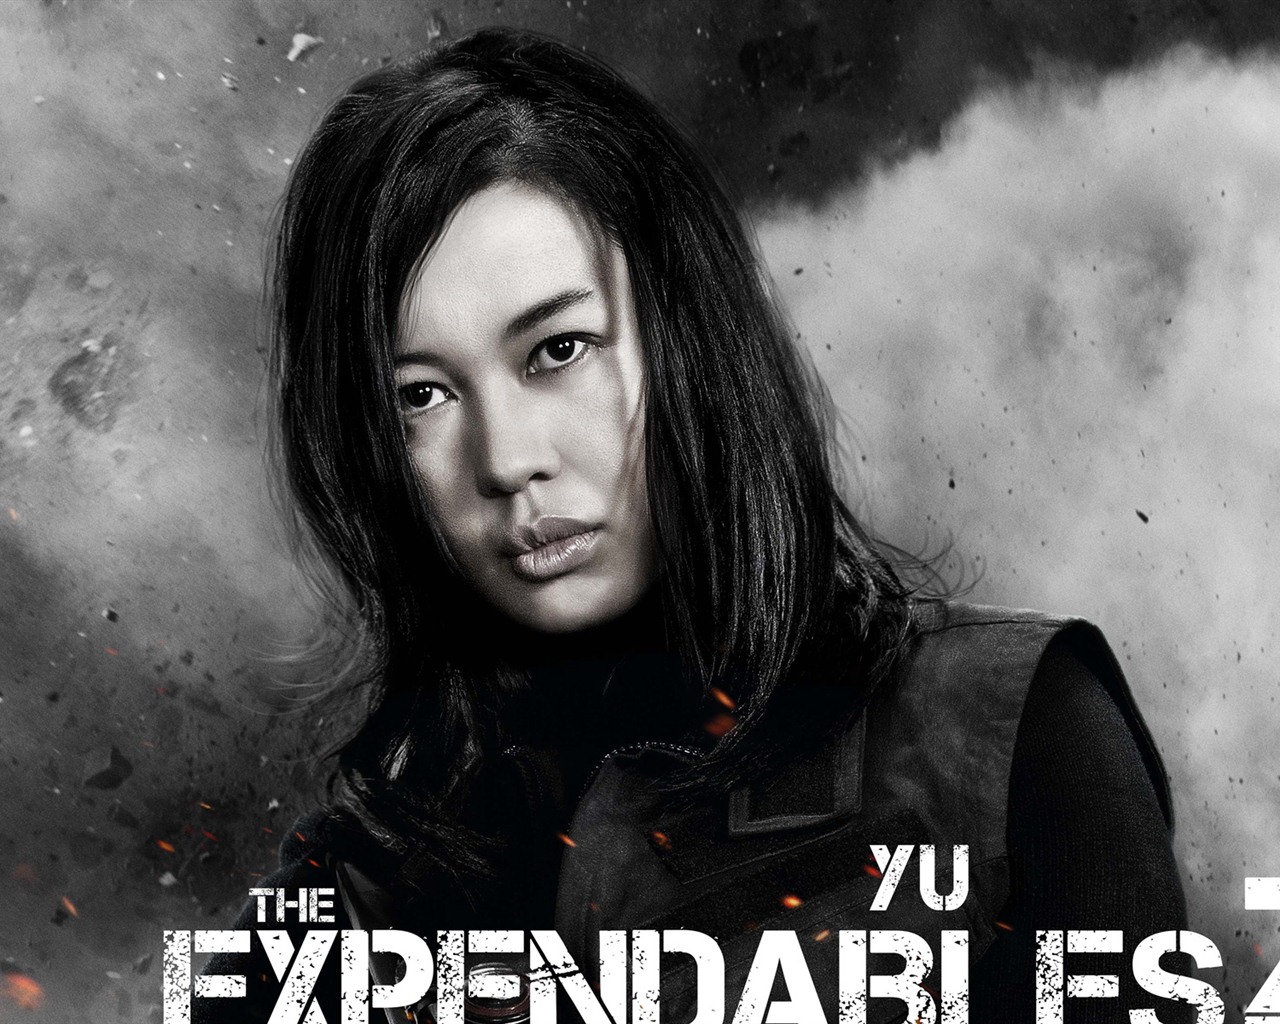 2012 The Expendables 2 敢死队2 高清壁纸11 - 1280x1024